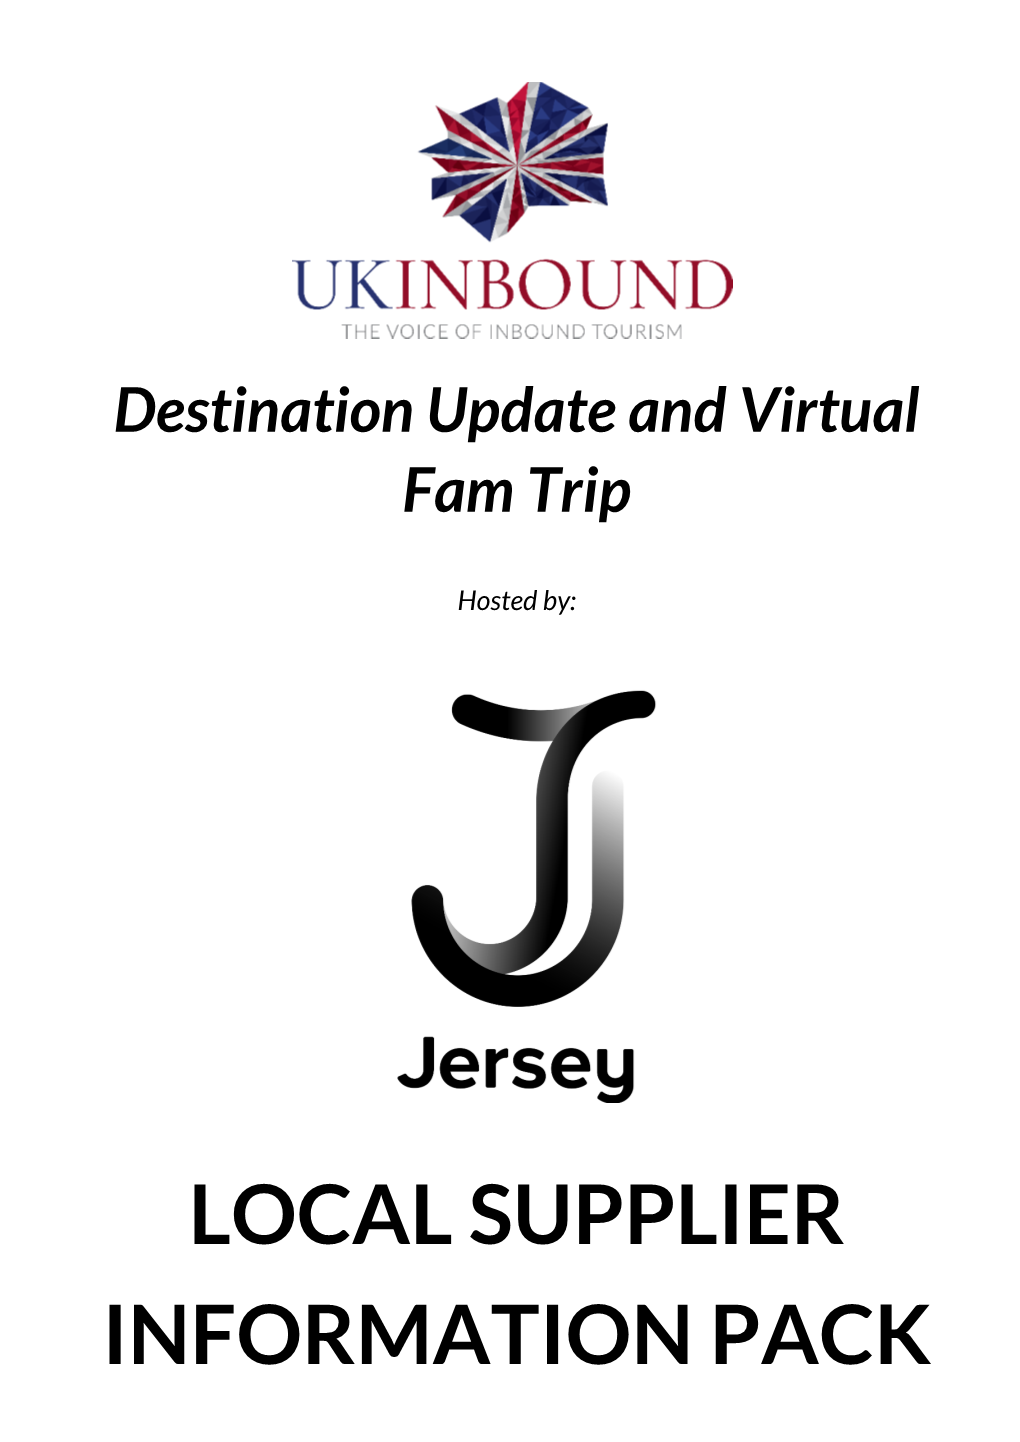 LOCAL SUPPLIER INFORMATION PACK Company: Jersey Bus Tours Lead Contact: Lisa Barnes